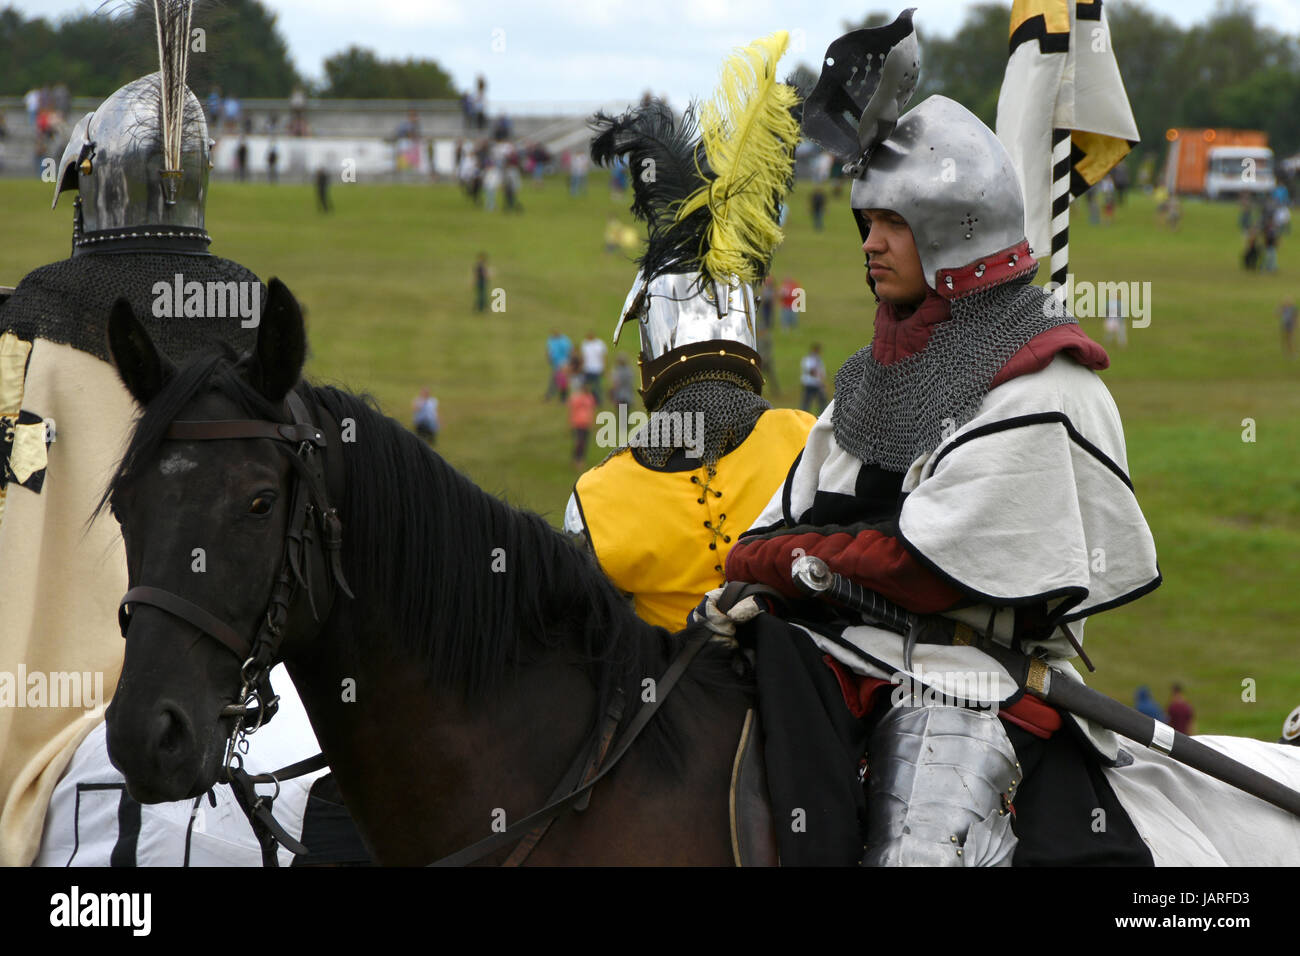 Battle of Grunwald. Clash of Teutonic knights, Polish and Lithuanian knights - Teutonic knight on a horse in a helmet with raised visor. Stock Photo